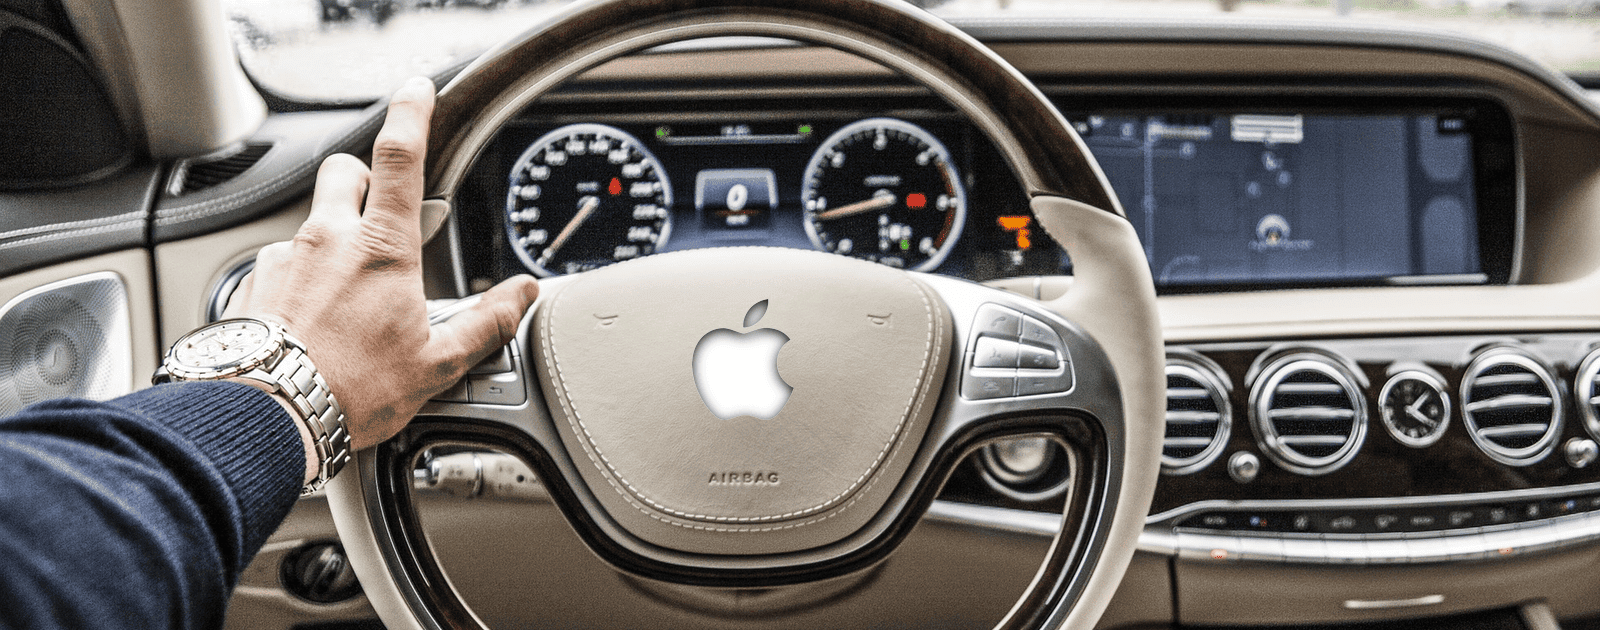 Apple Car Might Actually be an Electric Van Instead